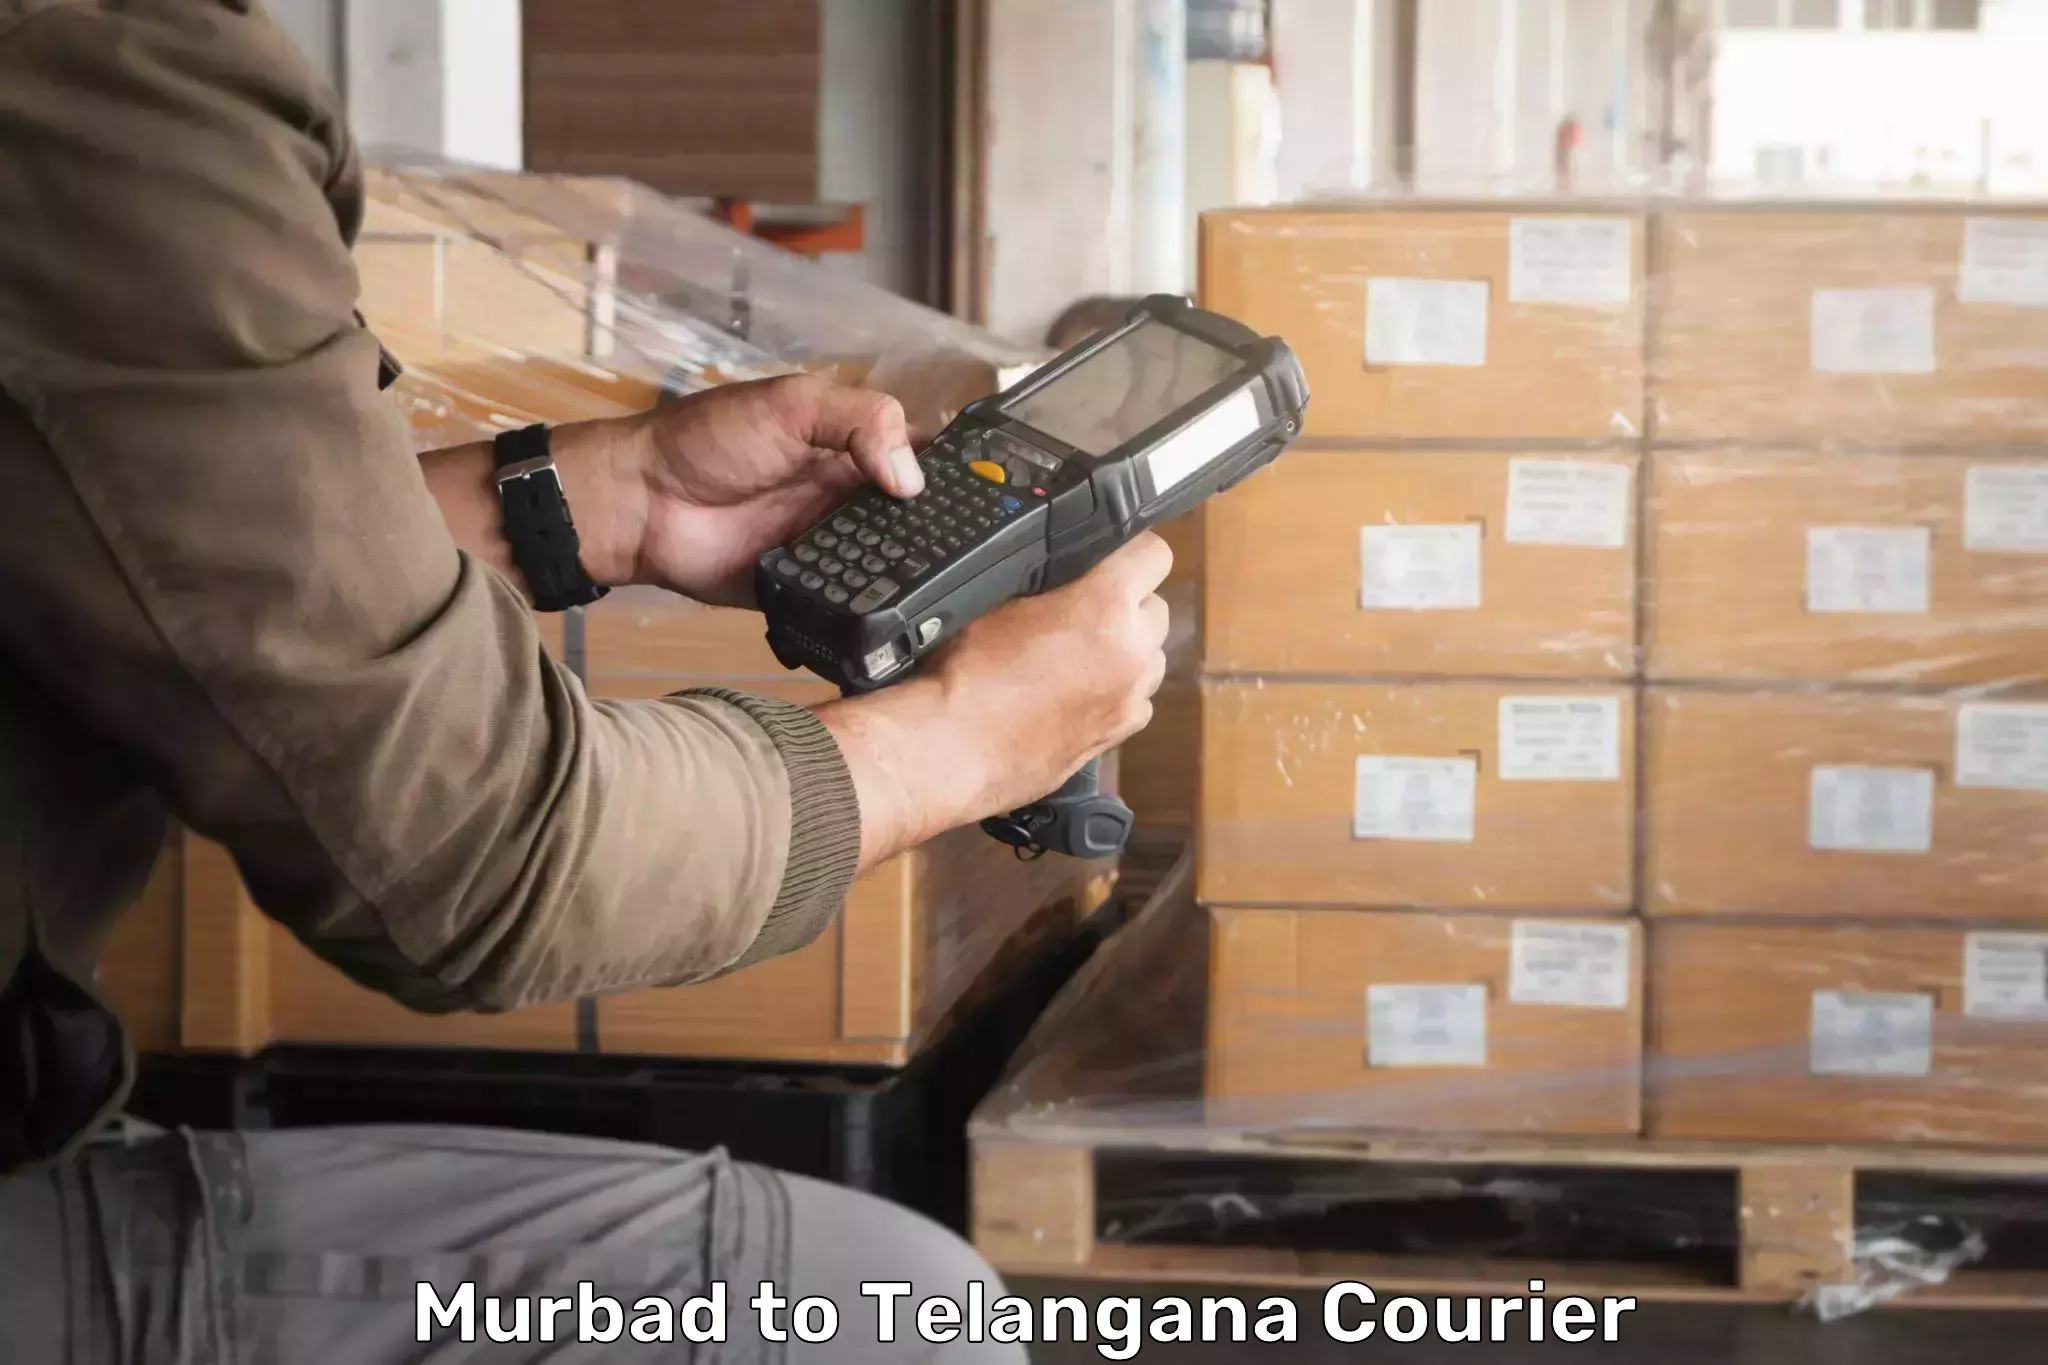 Quality courier services Murbad to Cheyyur